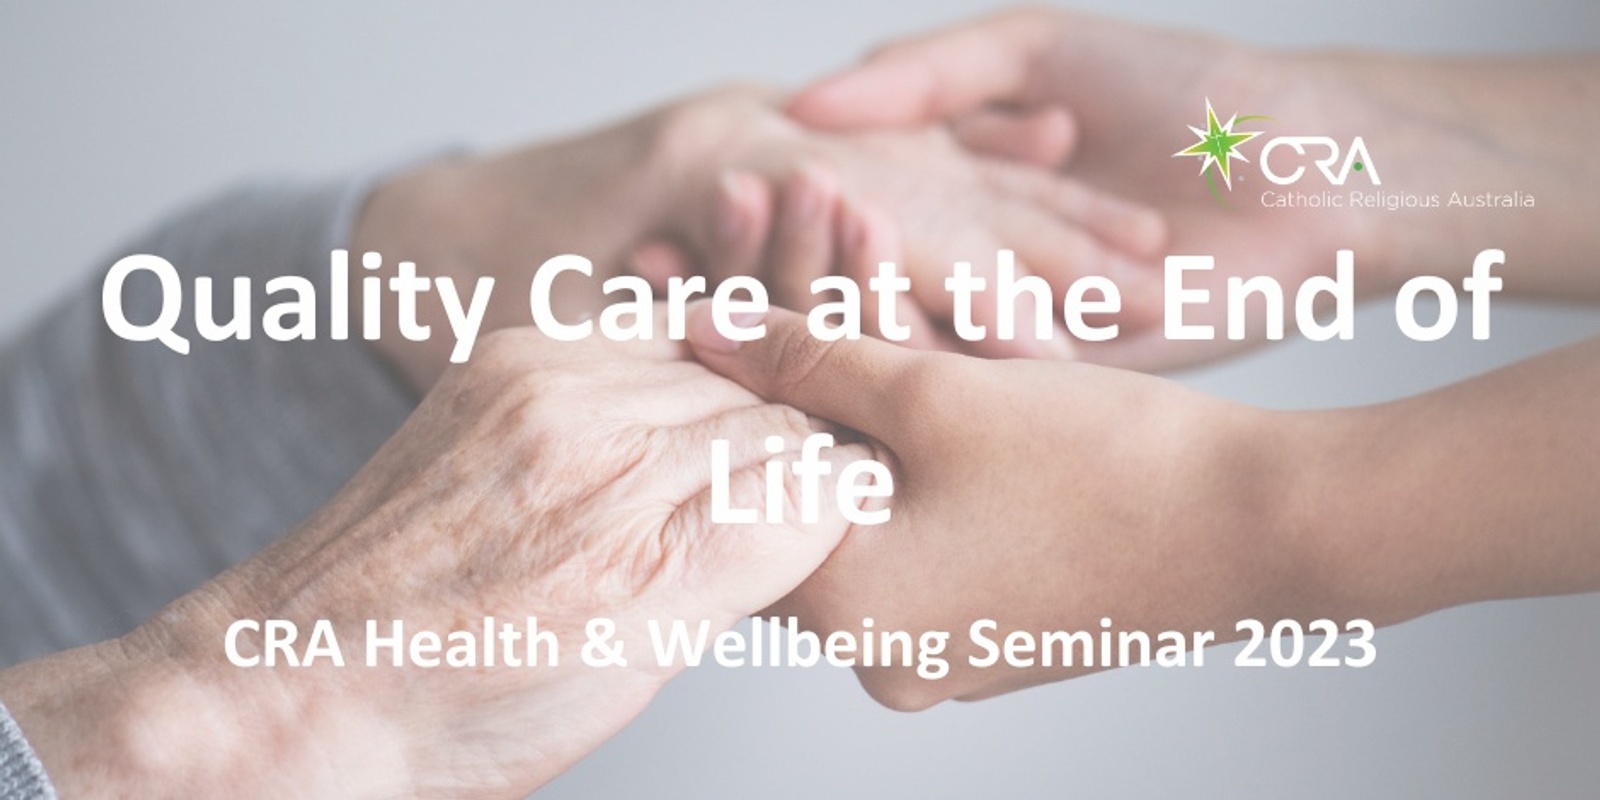 Banner image for Quality Care at the End of Life CRA Health & Wellbeing Seminar 2023